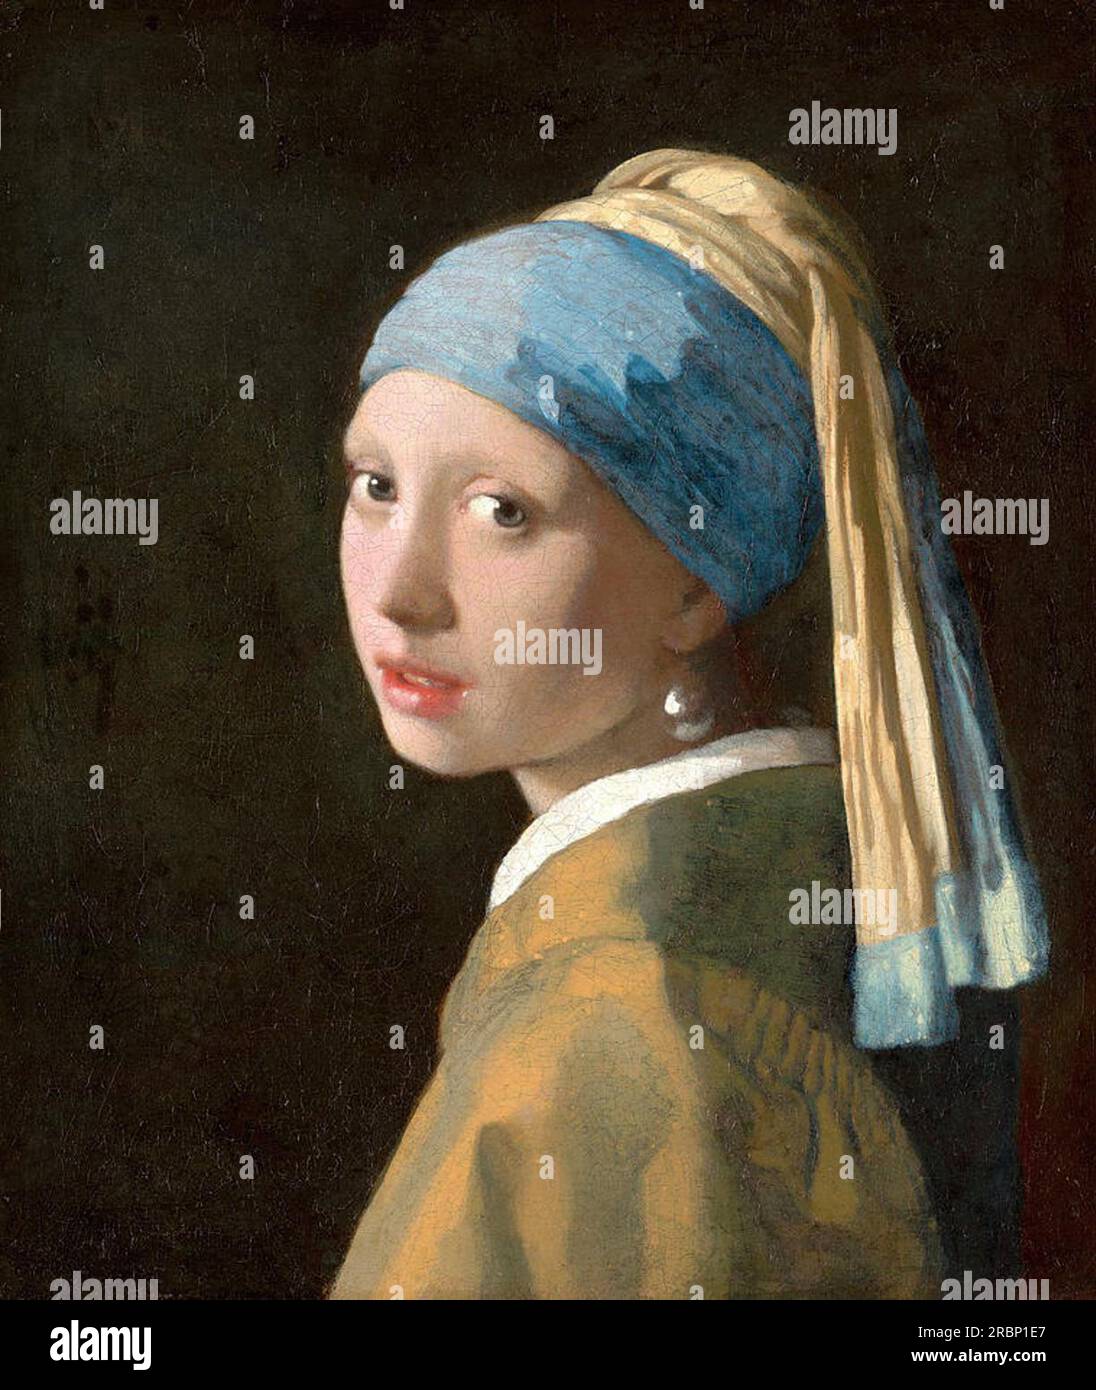 The Girl with a Pearl Earring 1665 by Johannes Vermeer Stock Photo